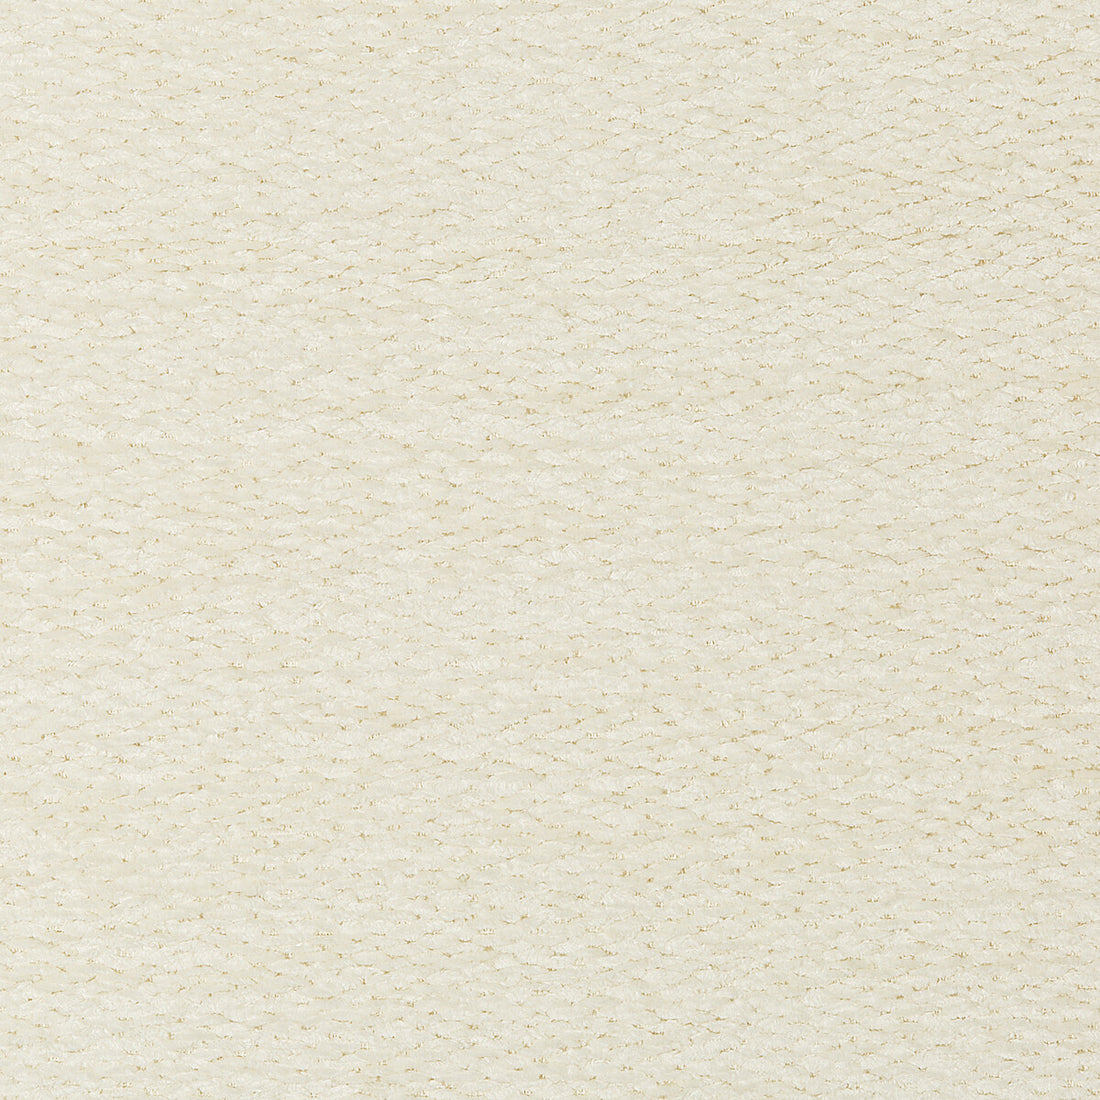 Clery Texture fabric in ivory color - pattern 8019150.1.0 - by Brunschwig &amp; Fils in the Chambery Textures II collection